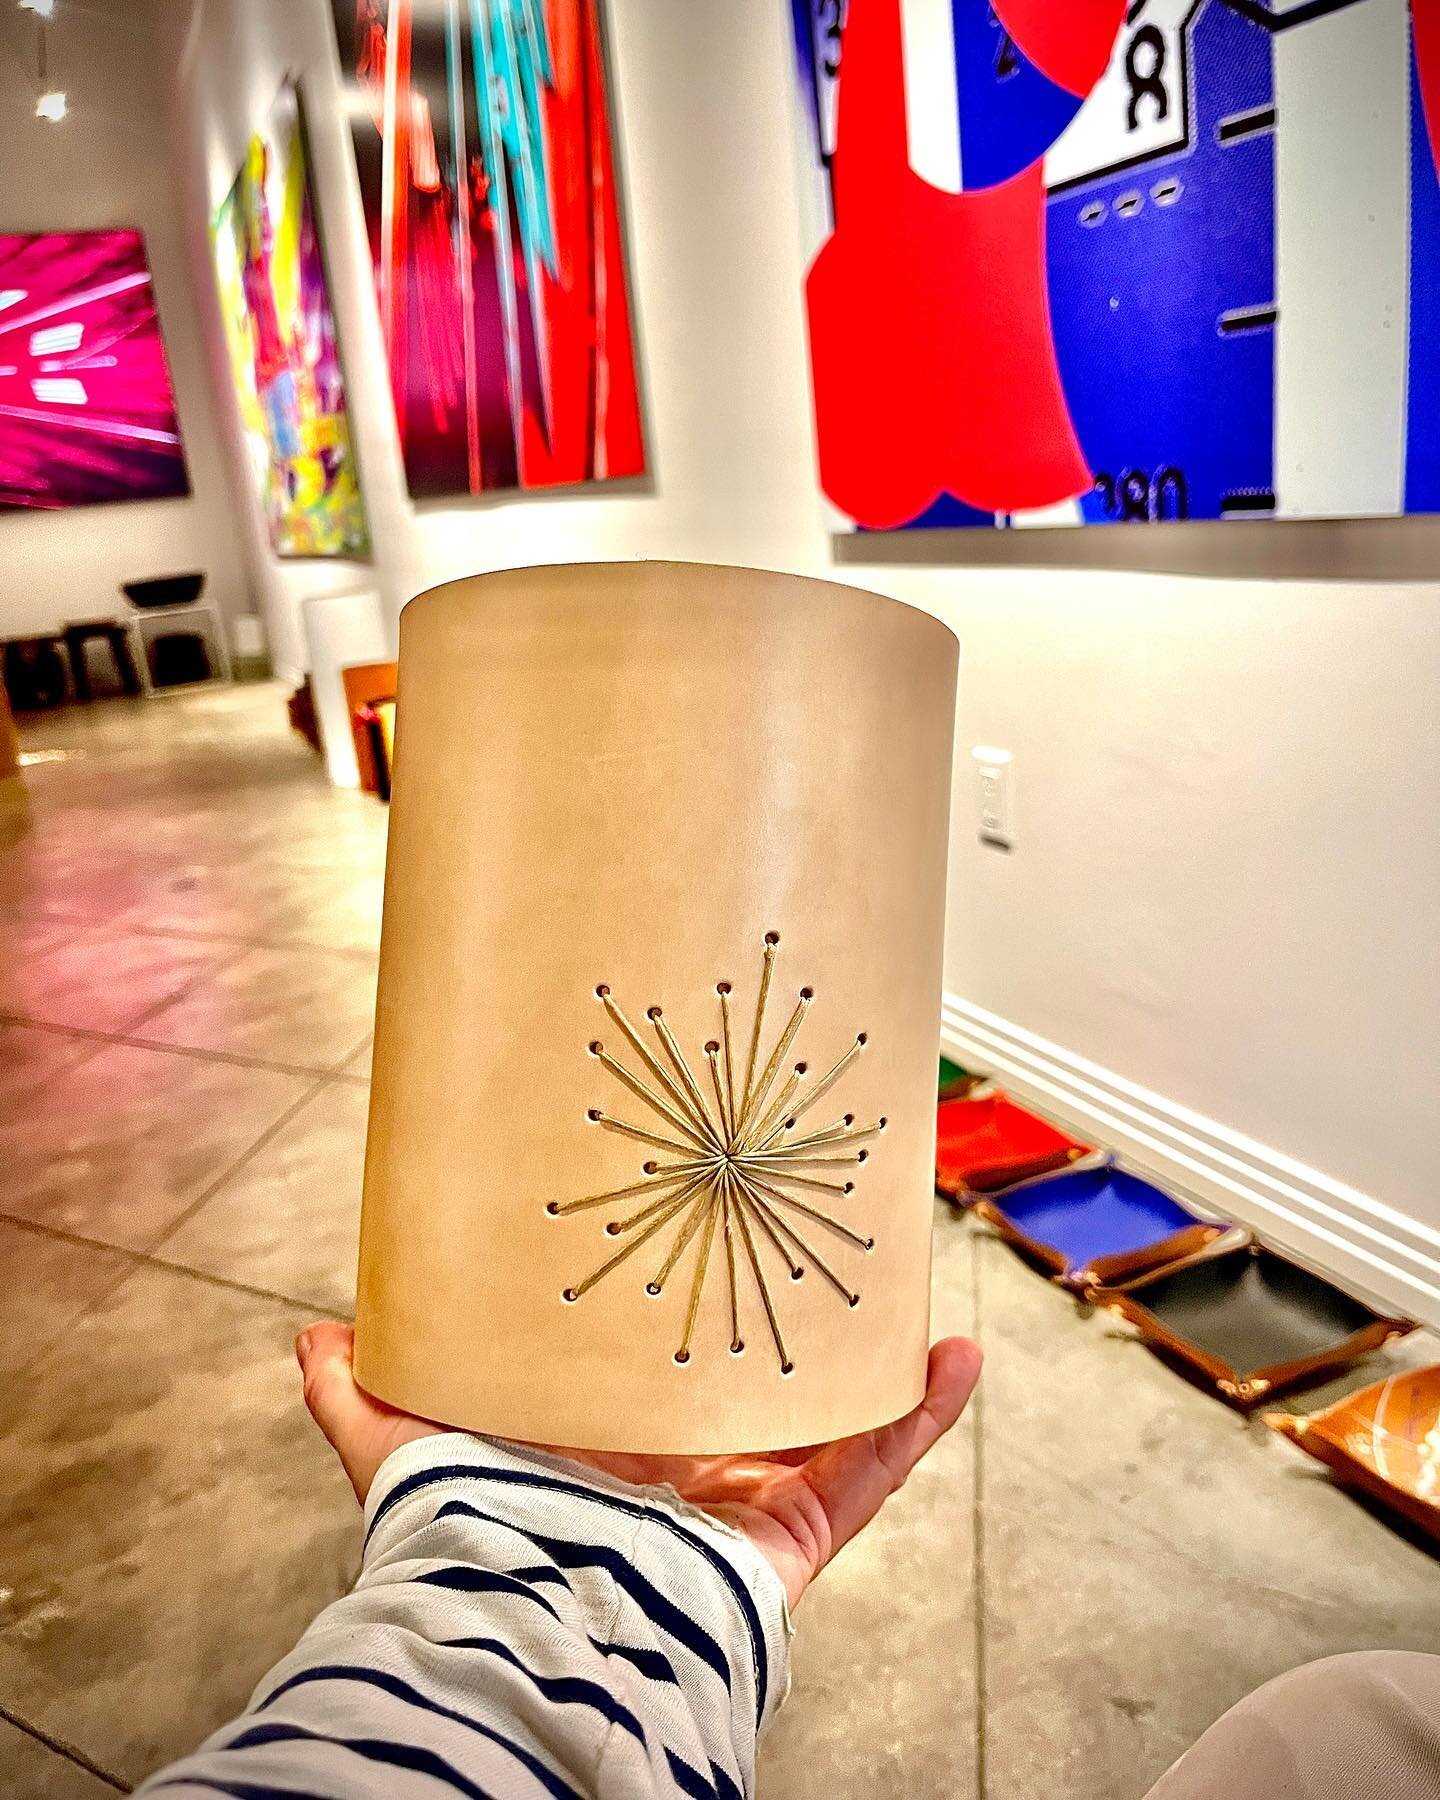 Find special one-off pieces like this Leather Wrapped Vase at our Los Angeles location - perfect for gifting the unique. 

#Handmadegifts #LeatherGoods #LeatherWrappedVase #ShopSmall #MadeInLA #MadeSolidLeather #InteriorDesign #UniqueCraftsmanship #H